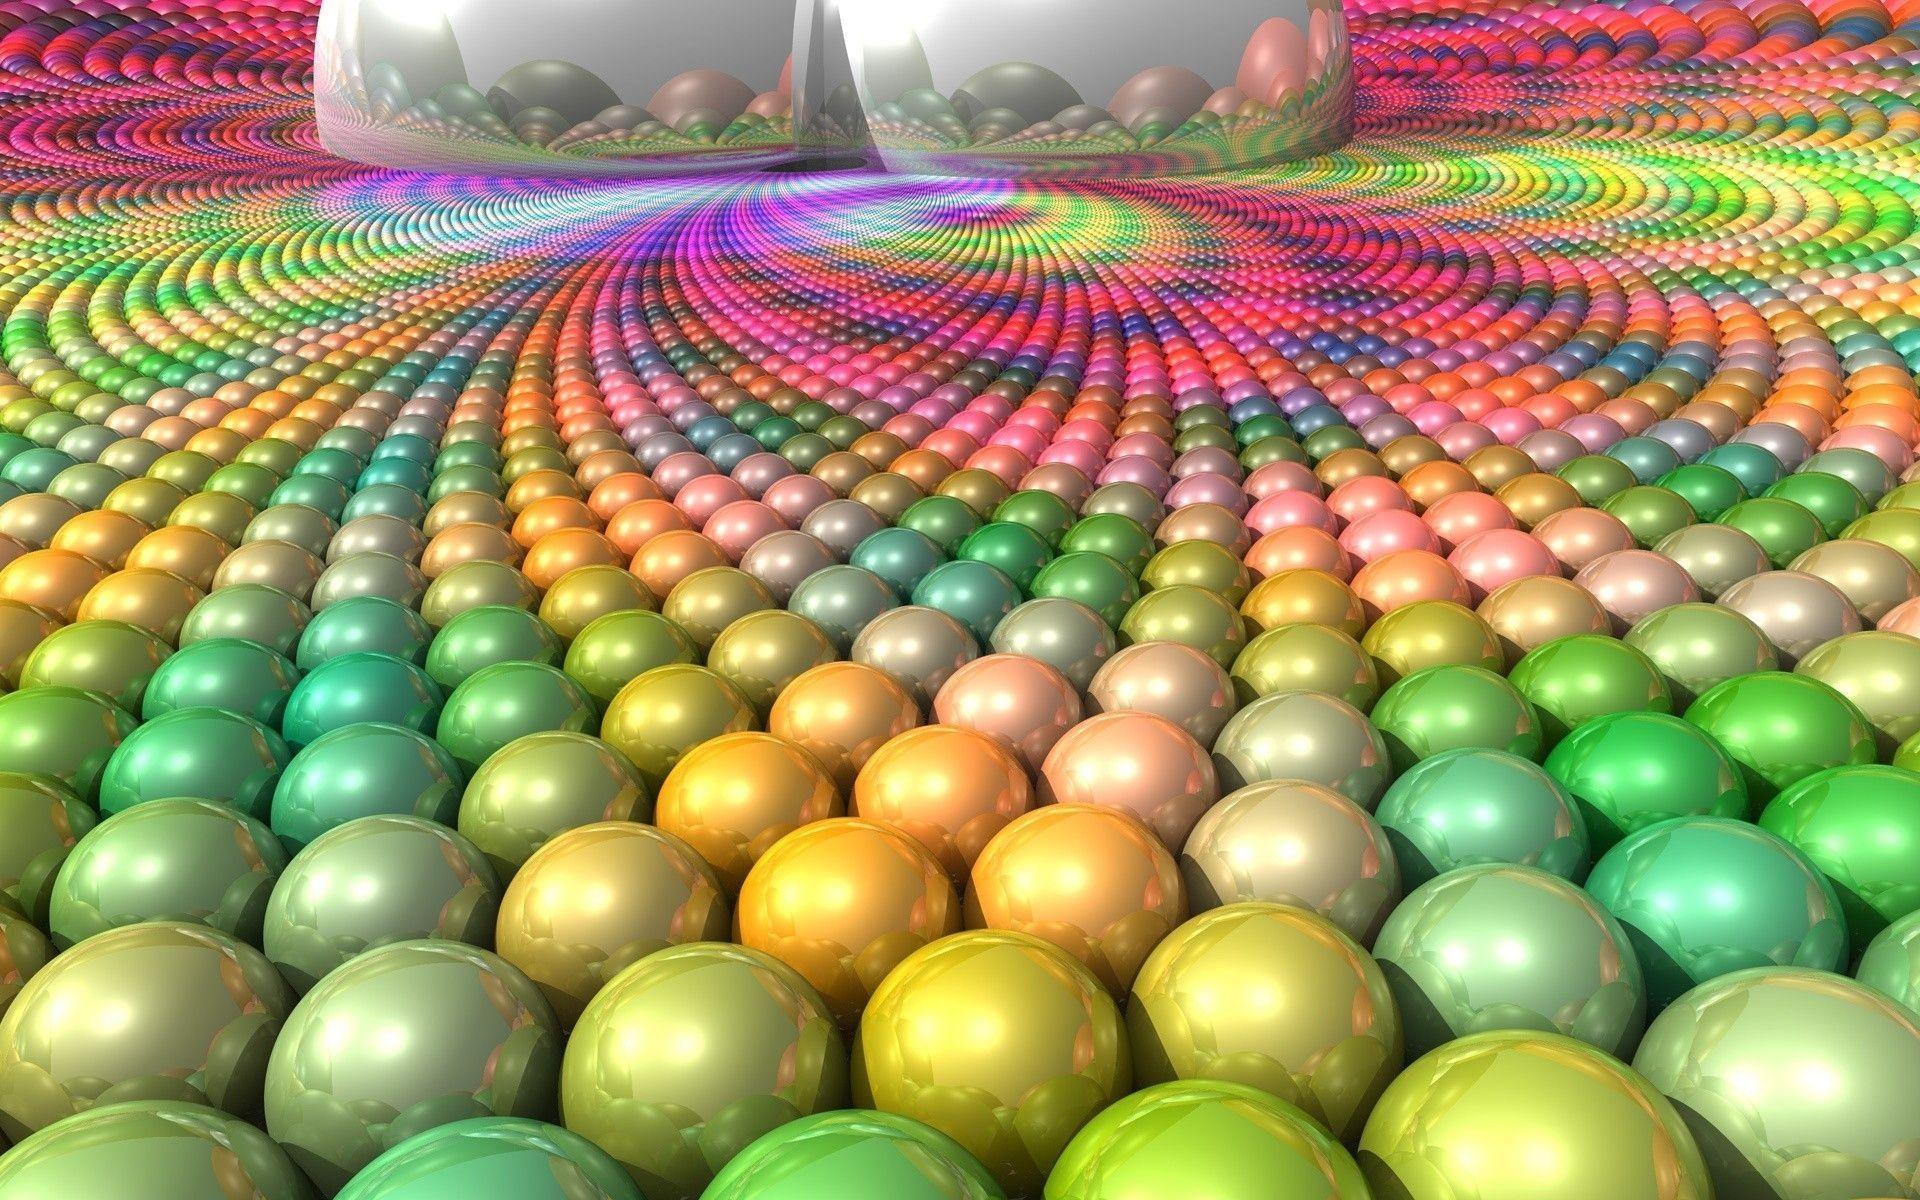 Graphics 3D Wallpaper, BALL SURFACE MULTI COLORED BRIGHT 0430